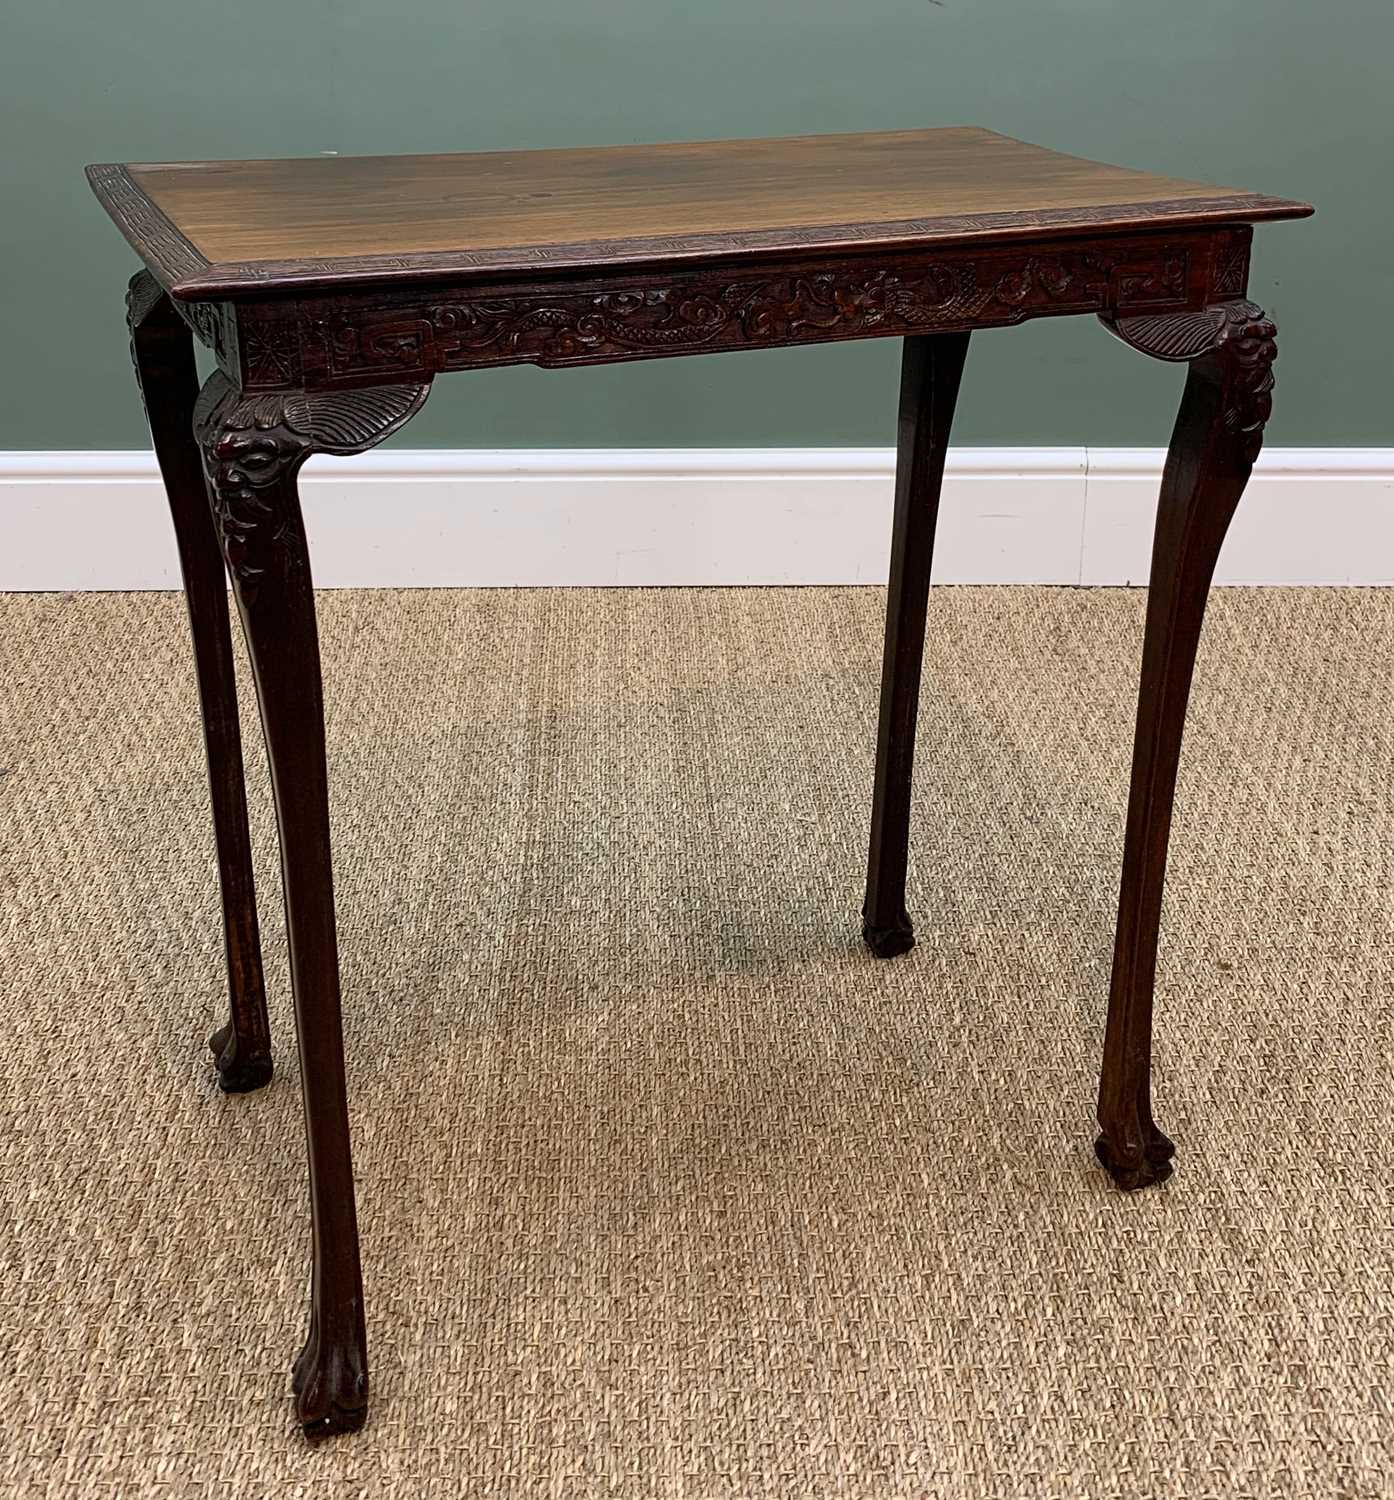 ASSORTED ANTIQUE FURNITURE, including William IV style mahogany tripod table with later carved - Image 5 of 5